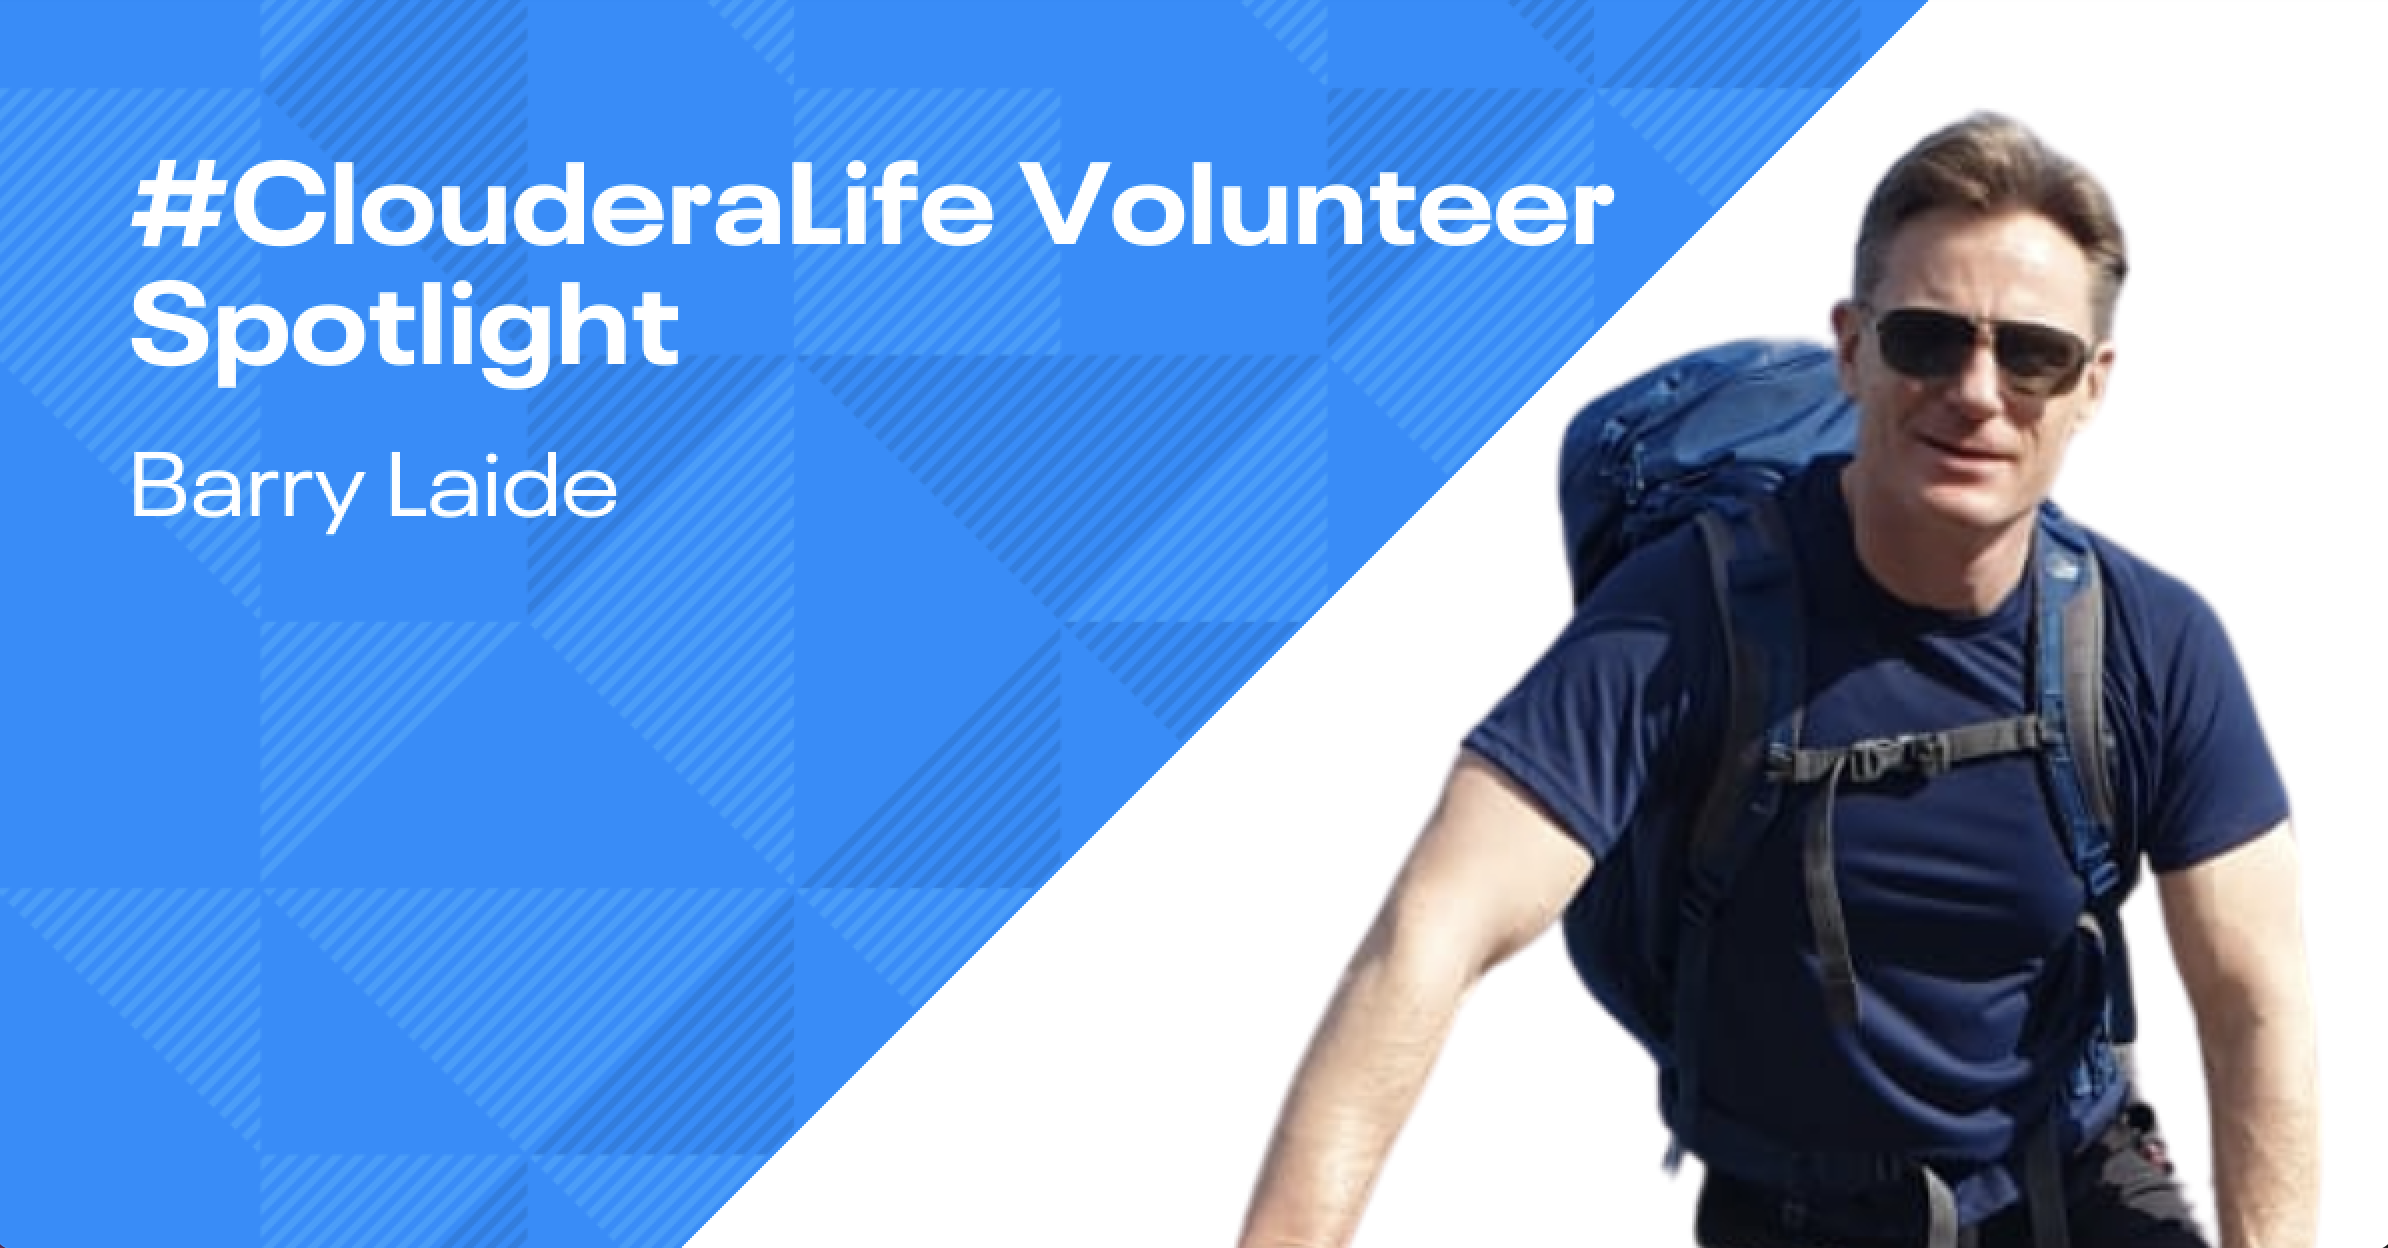 #Clouderalife Volunteer Highlight: Barry Laide